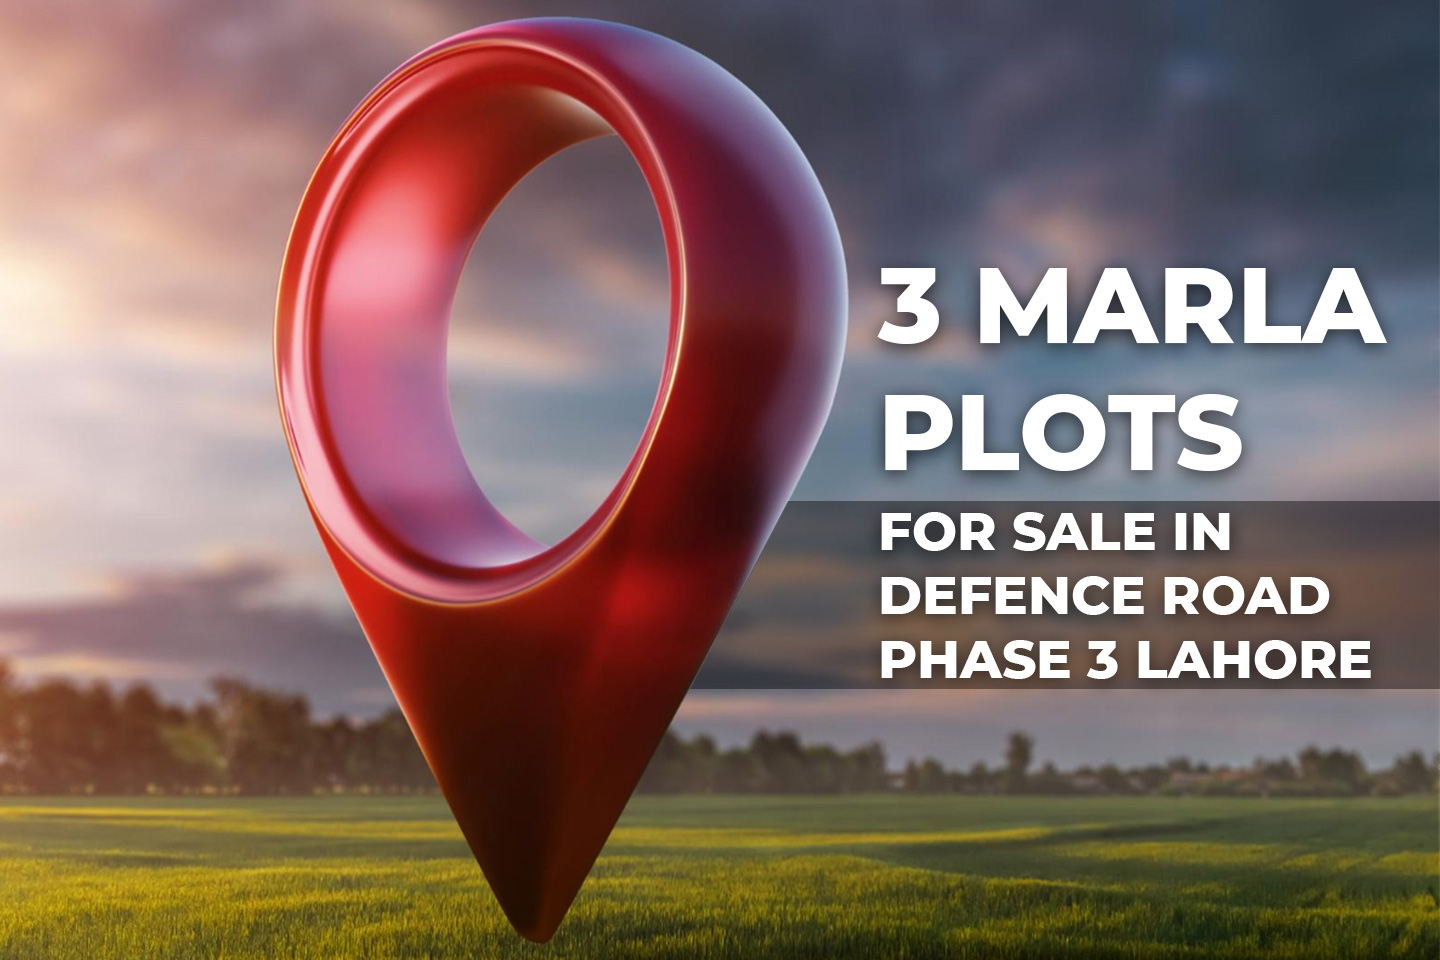 3 marla plots for sale in defence road phase 3 lahore